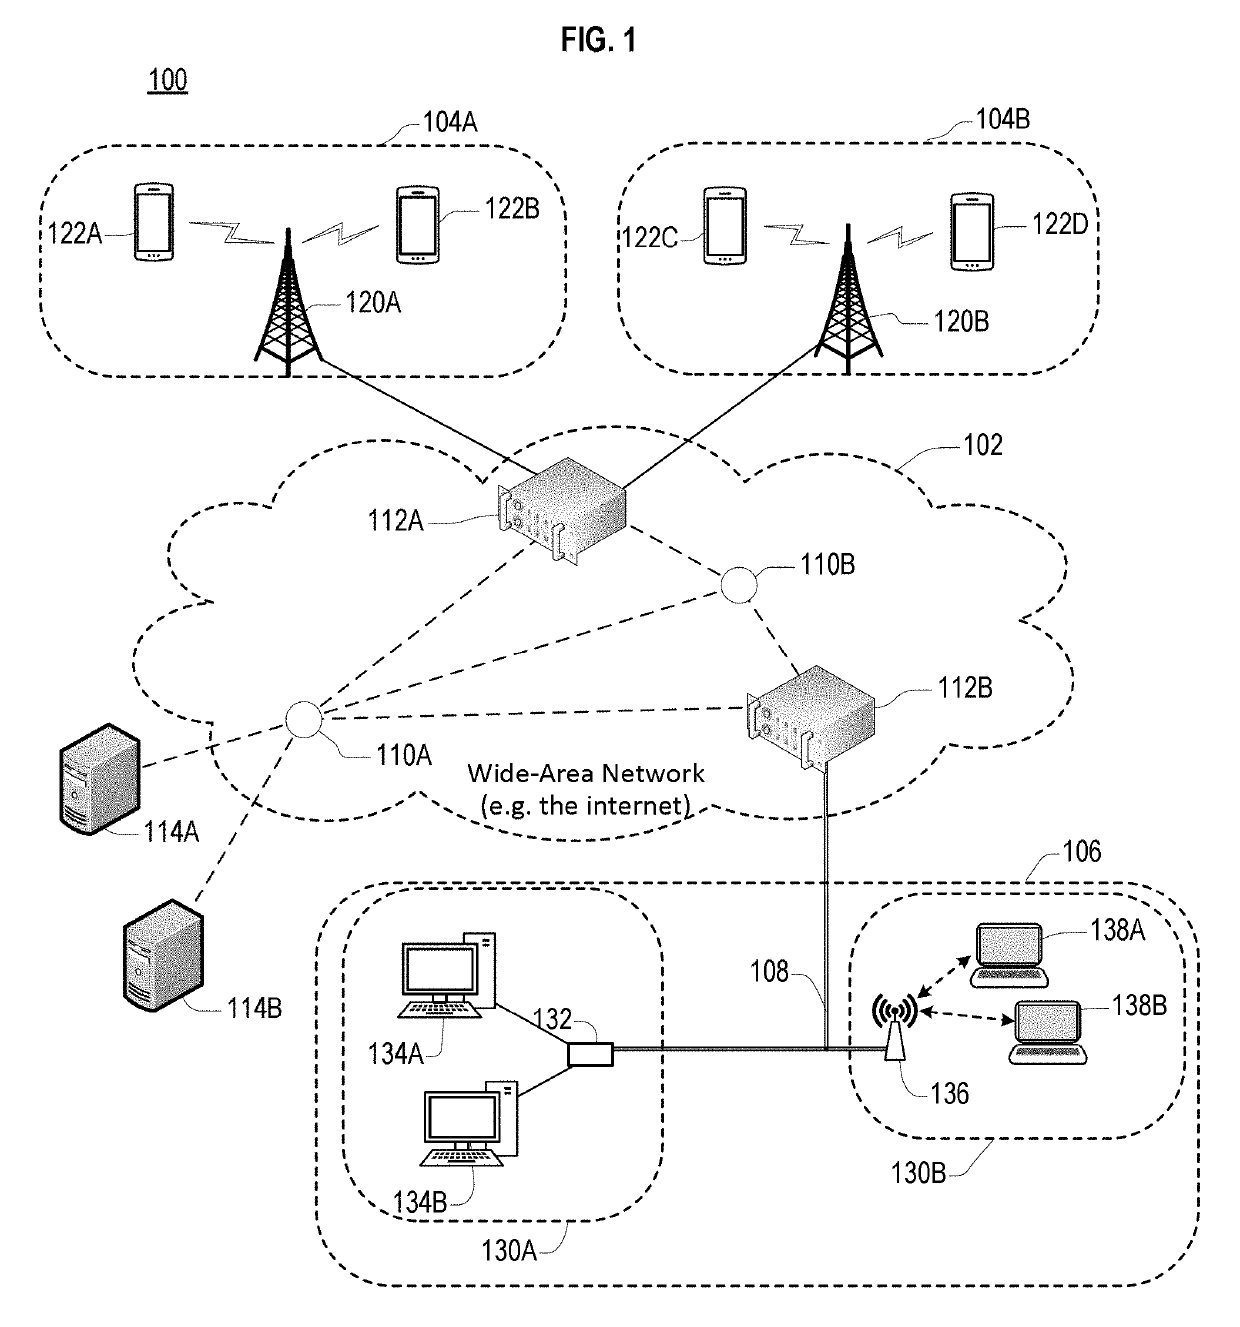 Coordinated data sharing in virtualized networking environments